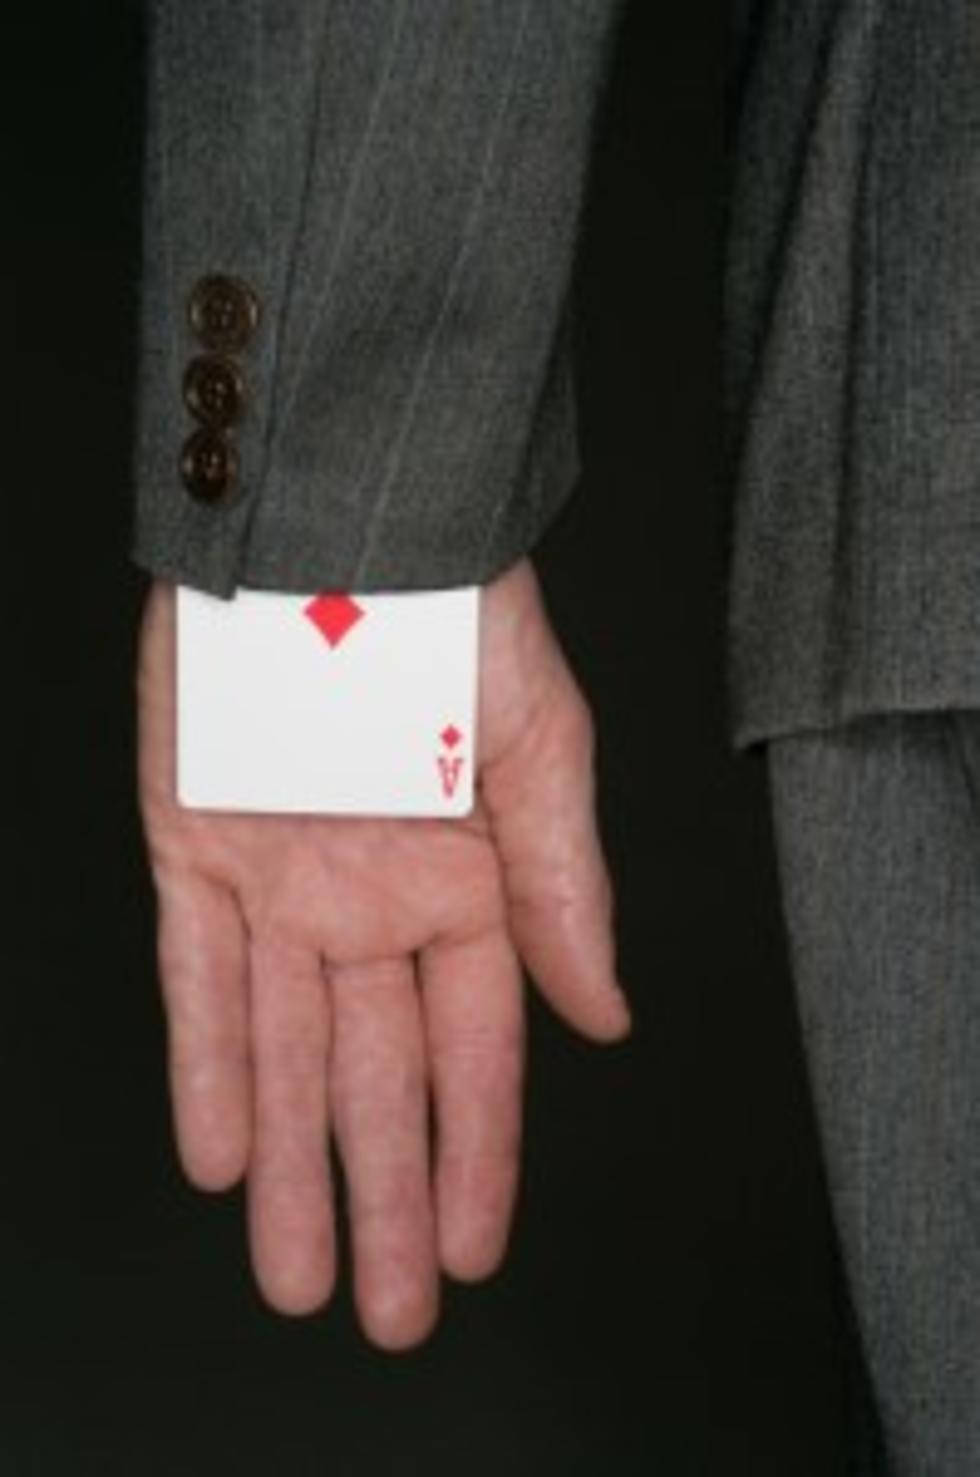 Check Out This Mind Blowing Card Trick [VIDEO]